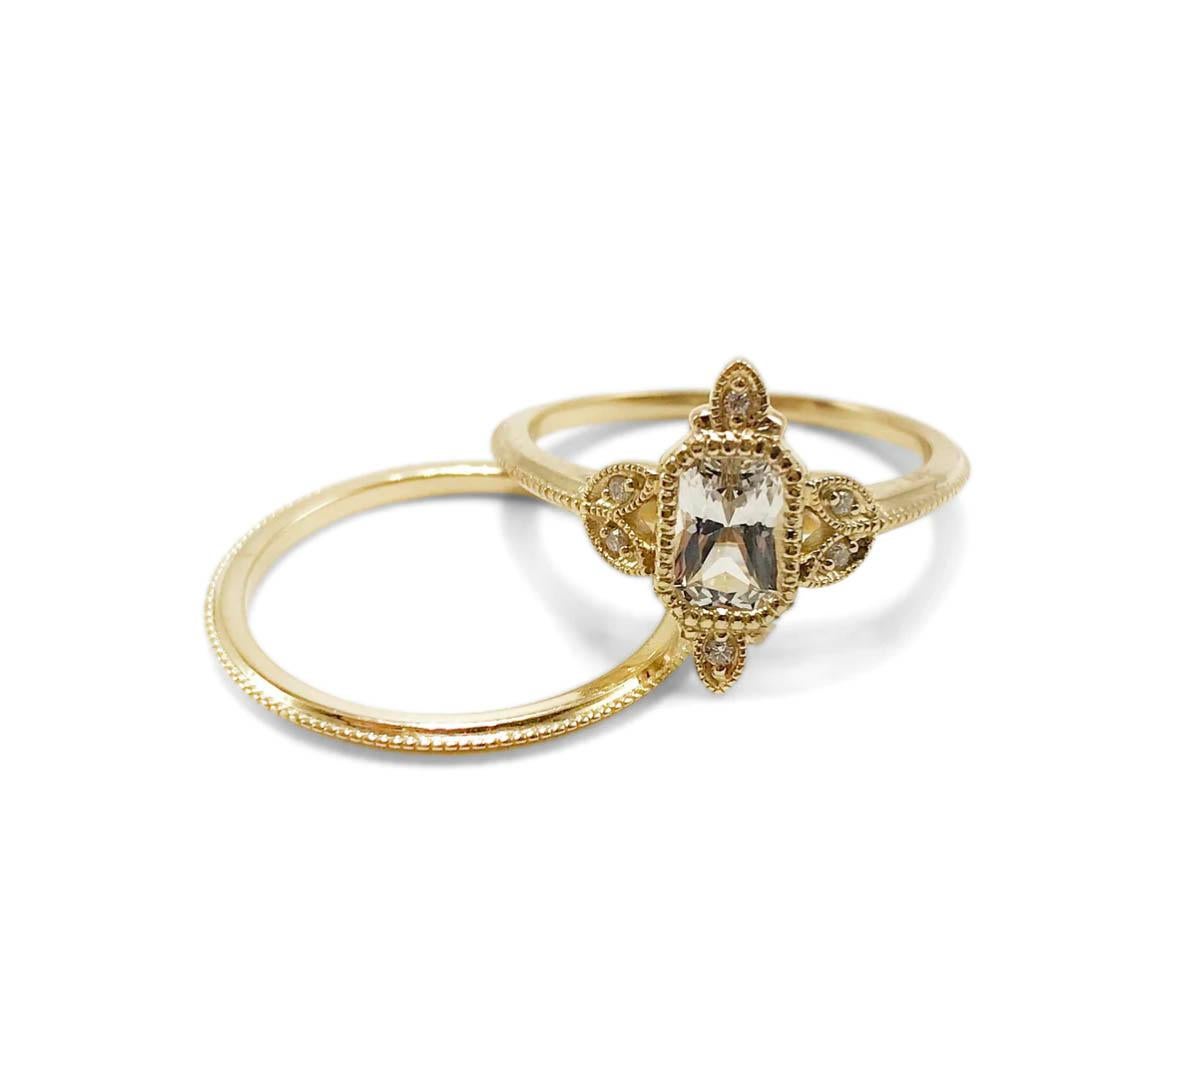 This 14K yellow gold band features detailed milgrain and metalwork surrounding an array of diamonds and a distinct emerald-cut center stone. Refined, elegant, and beautiful on the hand. 

Available to ship: 
- 14K Yellow Gold with an emerald cut